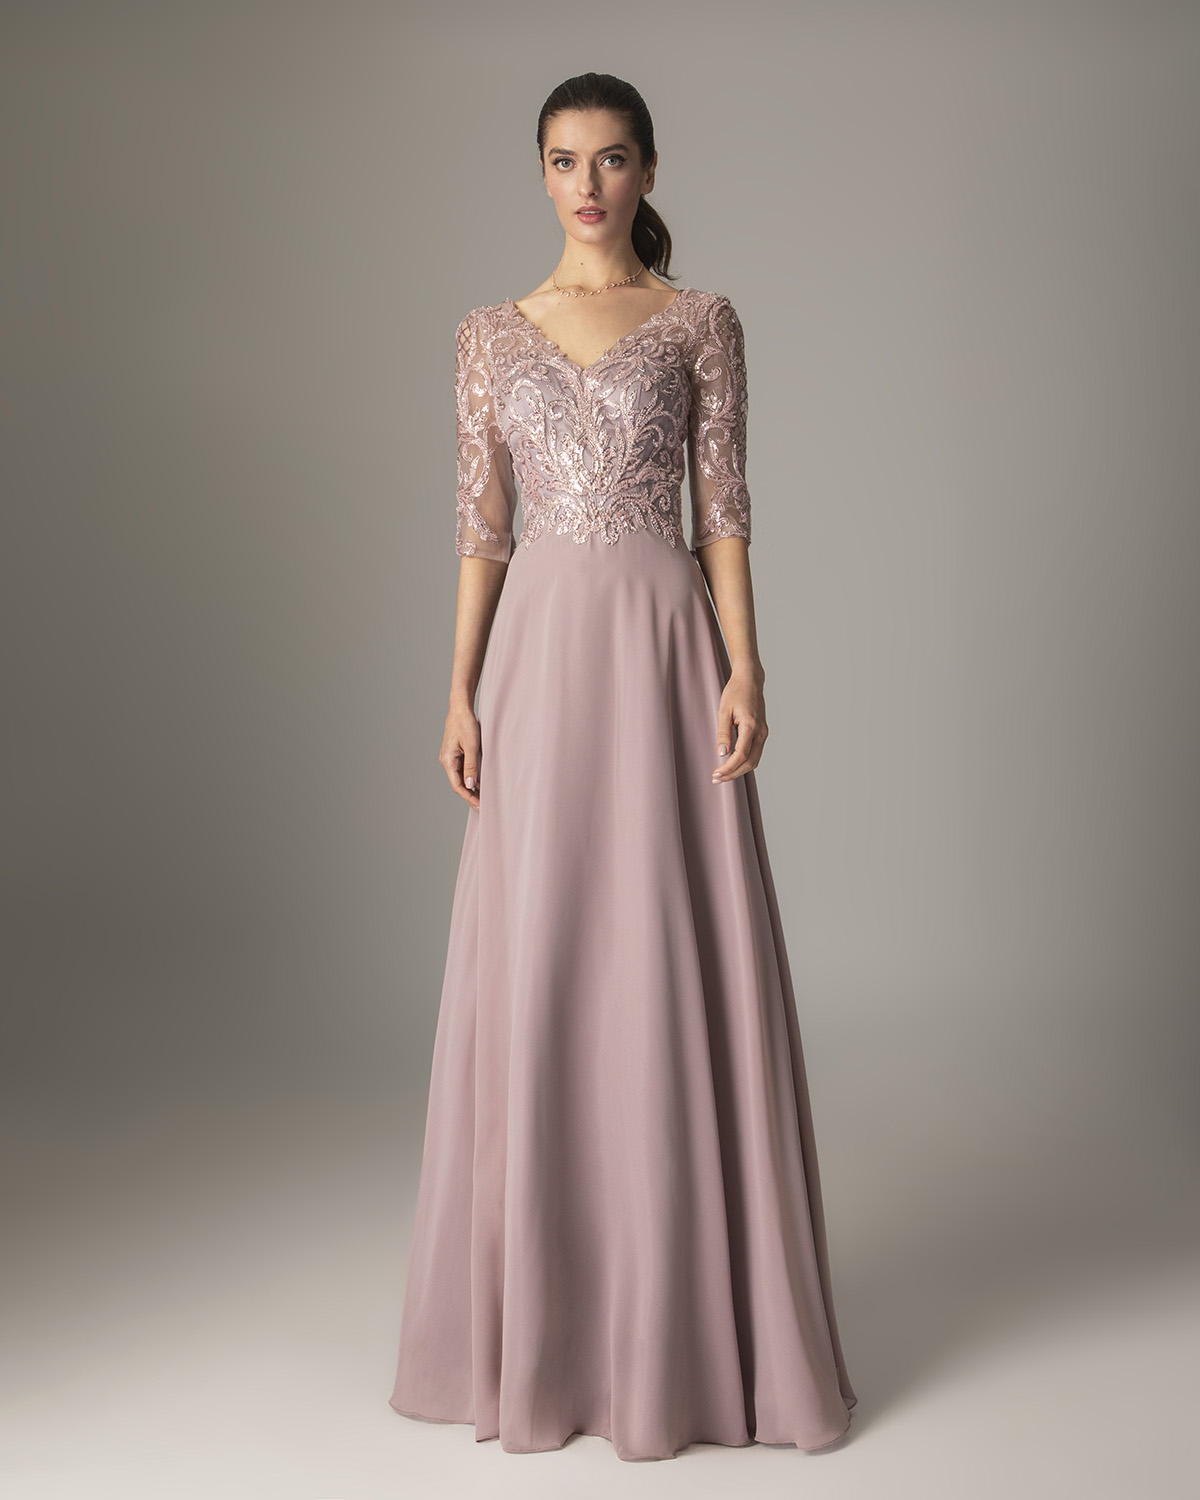 Classic Dresses / Long chiffon dress for the mother of the bride with fully beaded top and sleeves